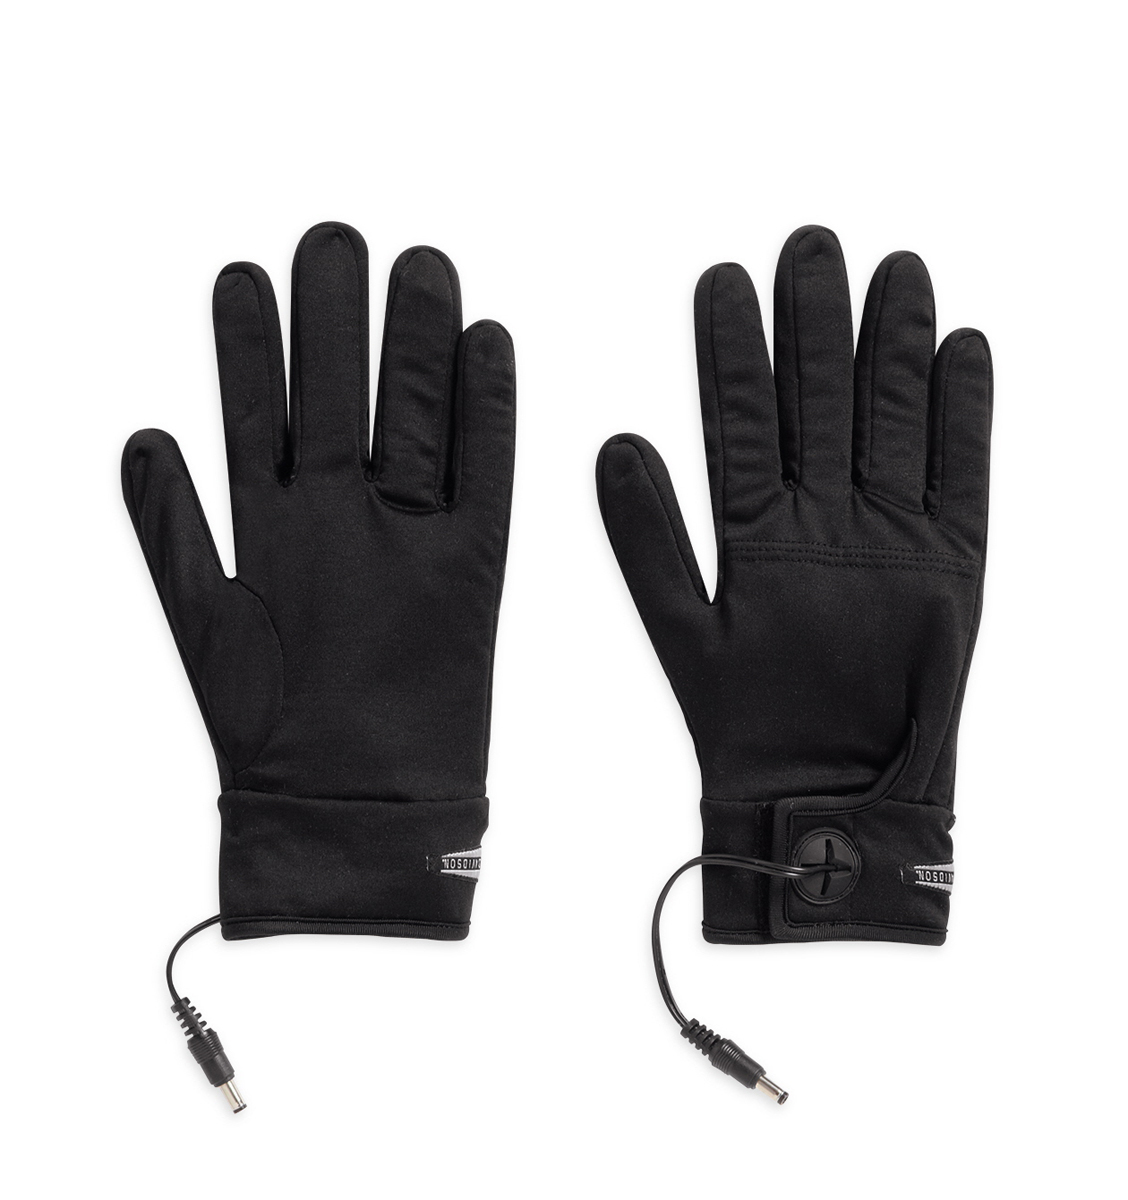 Heated One Touch Programmable Glove Liners